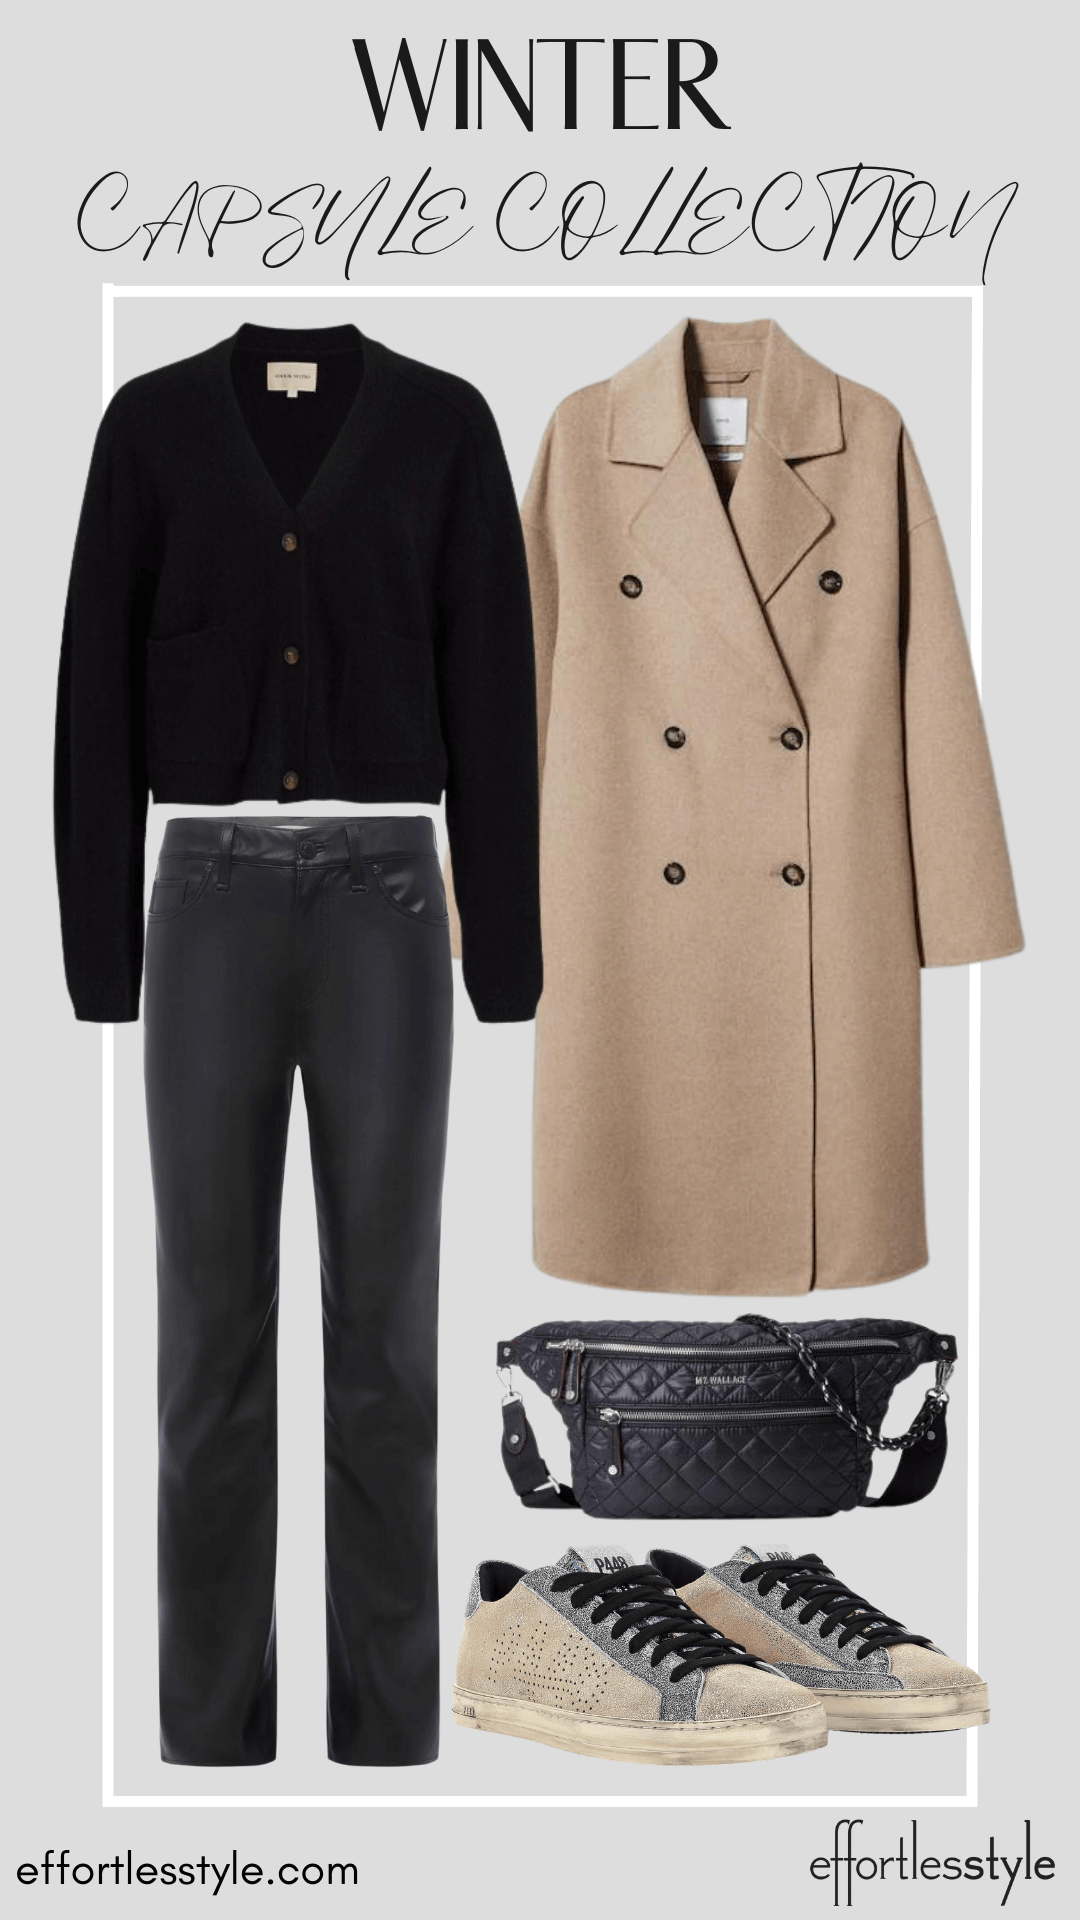 How To Wear Our Winter Capsule Wardrobe - Part 1 Wool Coat & Cropped Cardigan & Faux Leather Pants how to wear a classic wool coat with jeans how to wear a dressy wool coat casually how to wear a dressy coat with jeans how to style faux leather pants with sneakers how to style a cropped cardigan